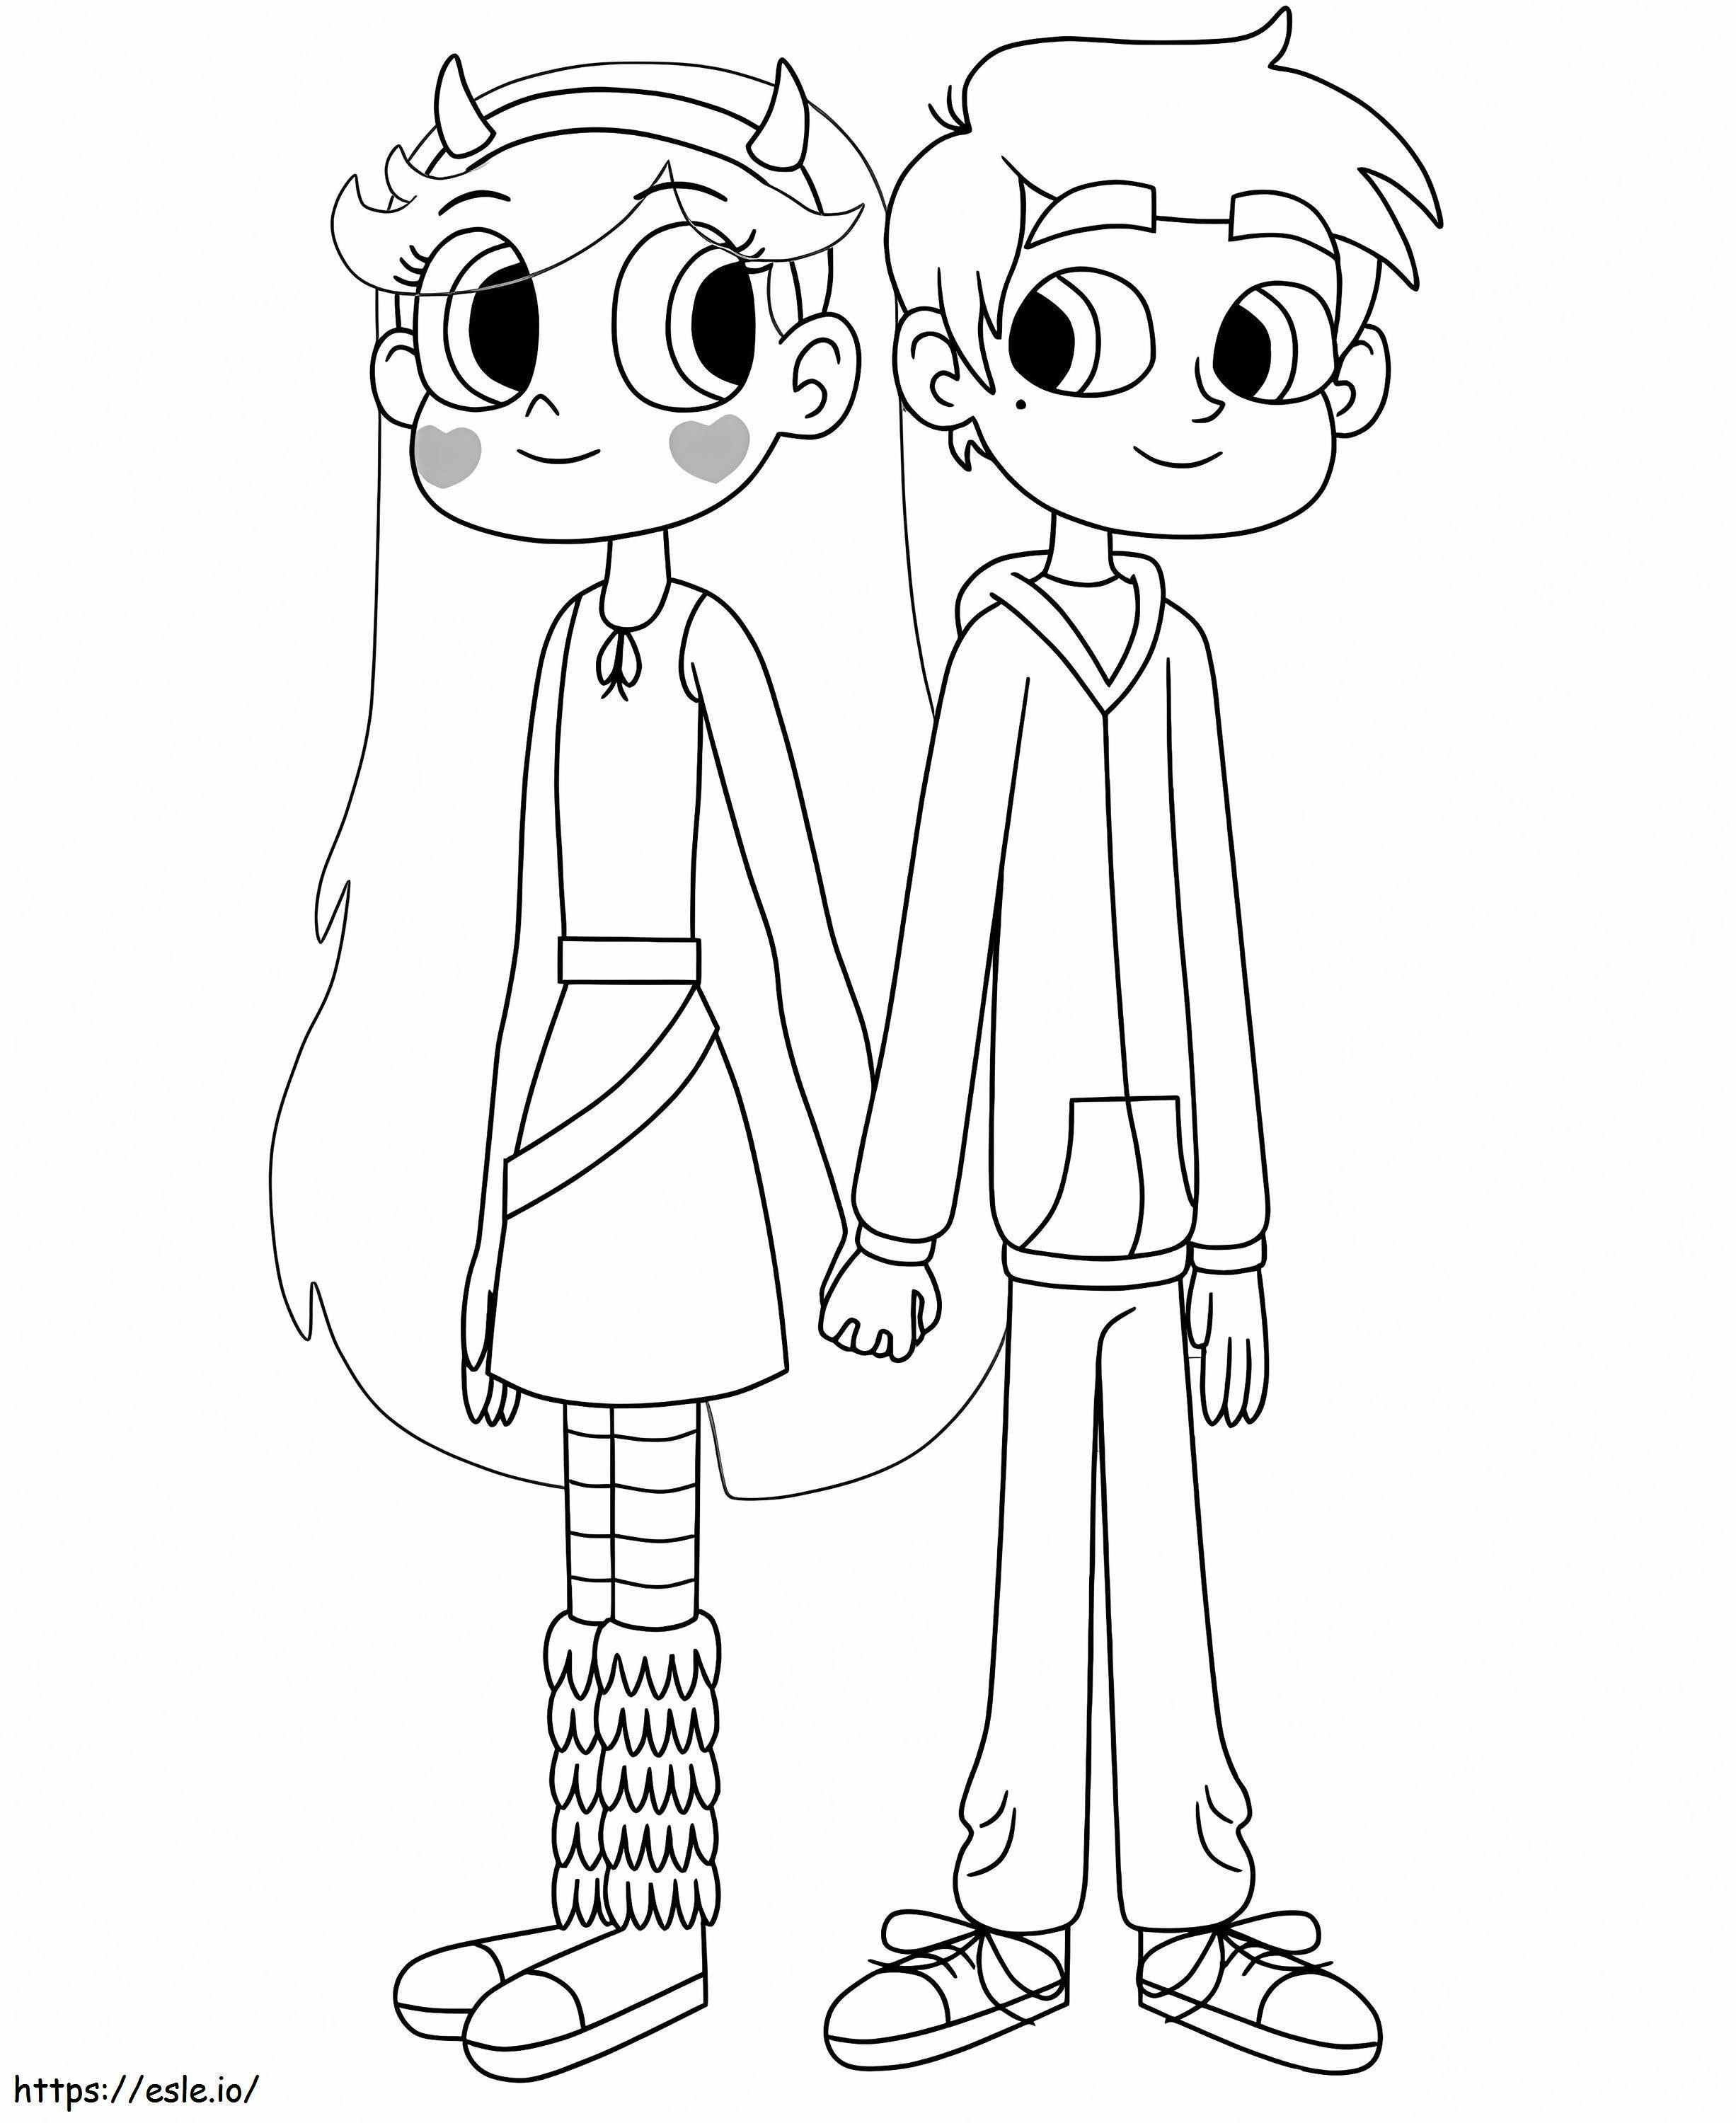 Star Butterfly With Marco coloring page